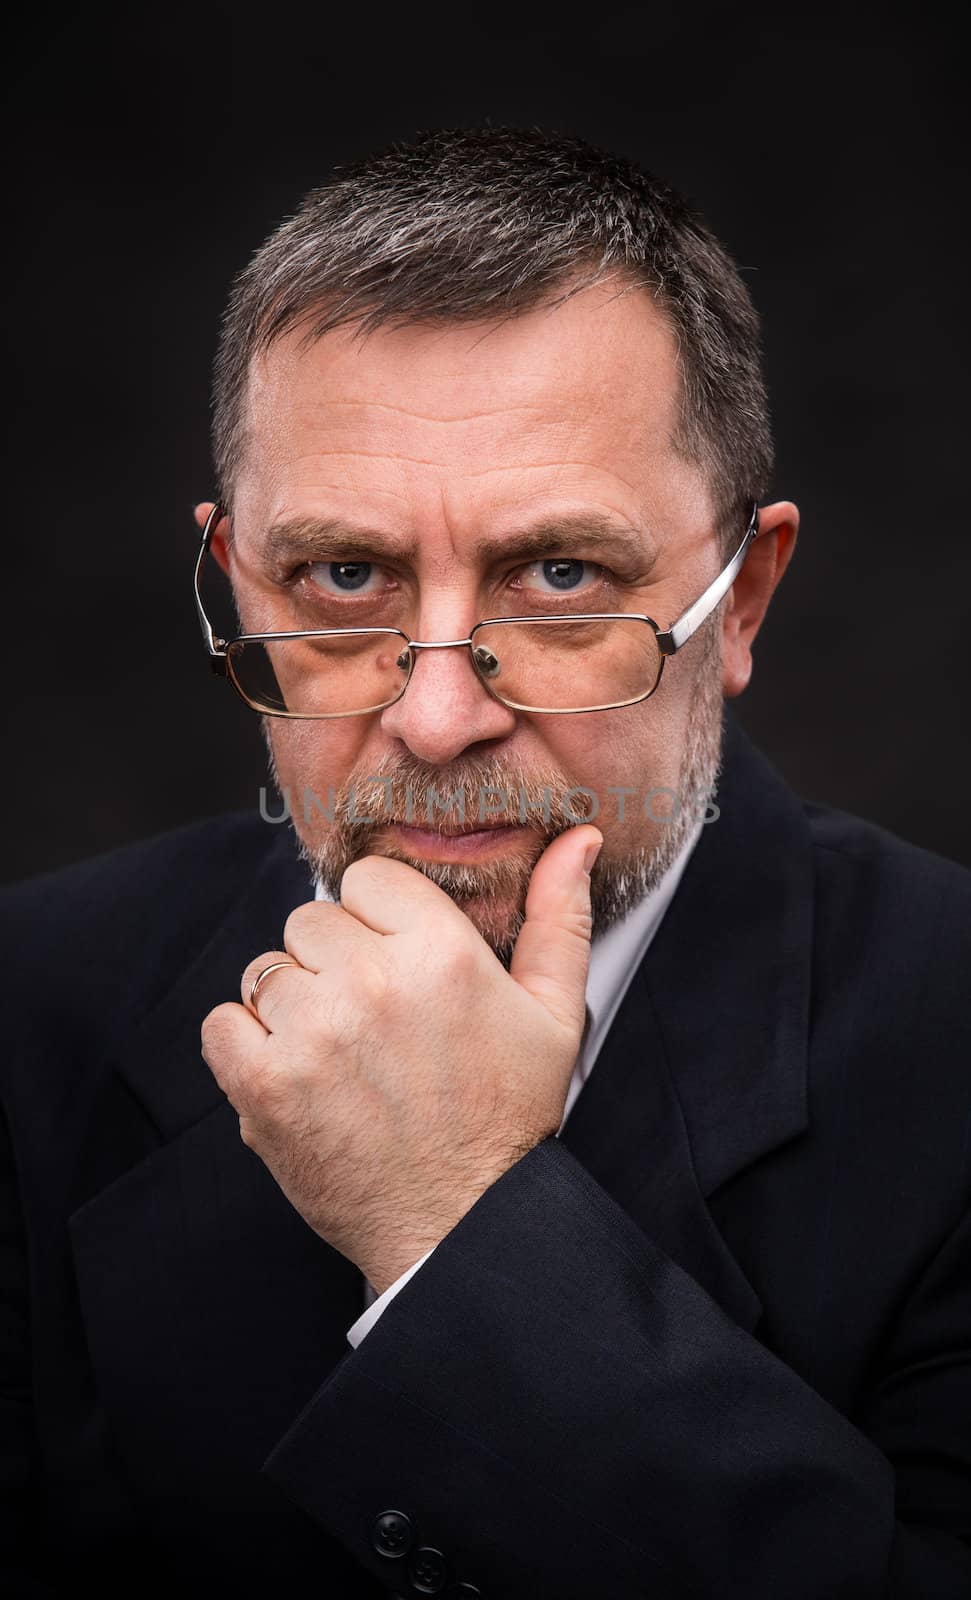 Portrait of handsome senior man with glasses prop up the head with his hand